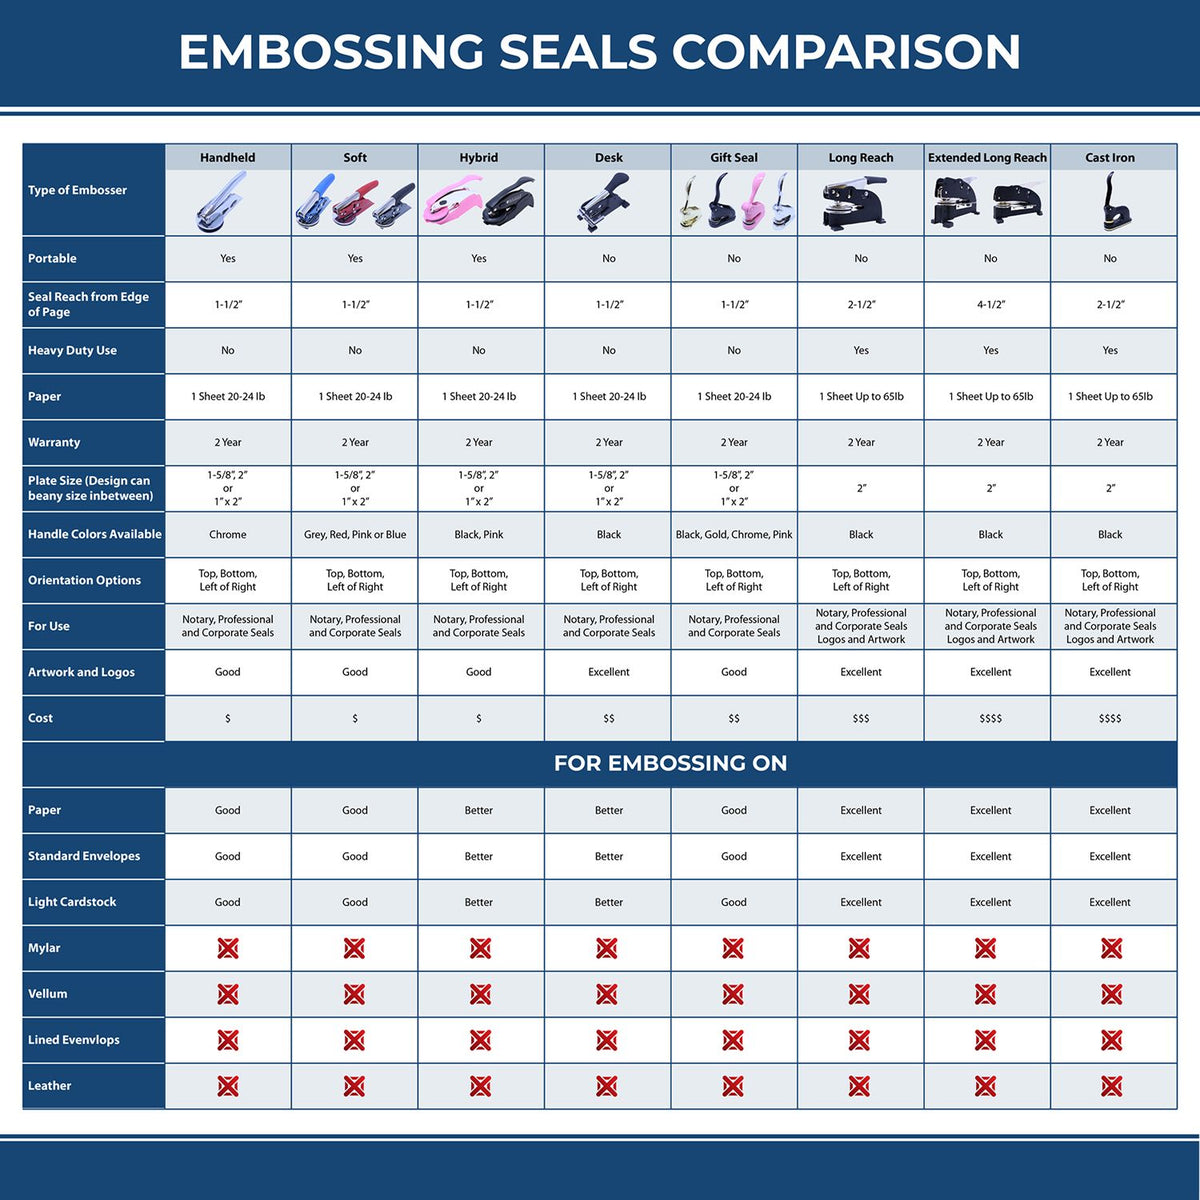 A comparison chart for the different types of mount models available for the Hybrid Illinois Landscape Architect Seal